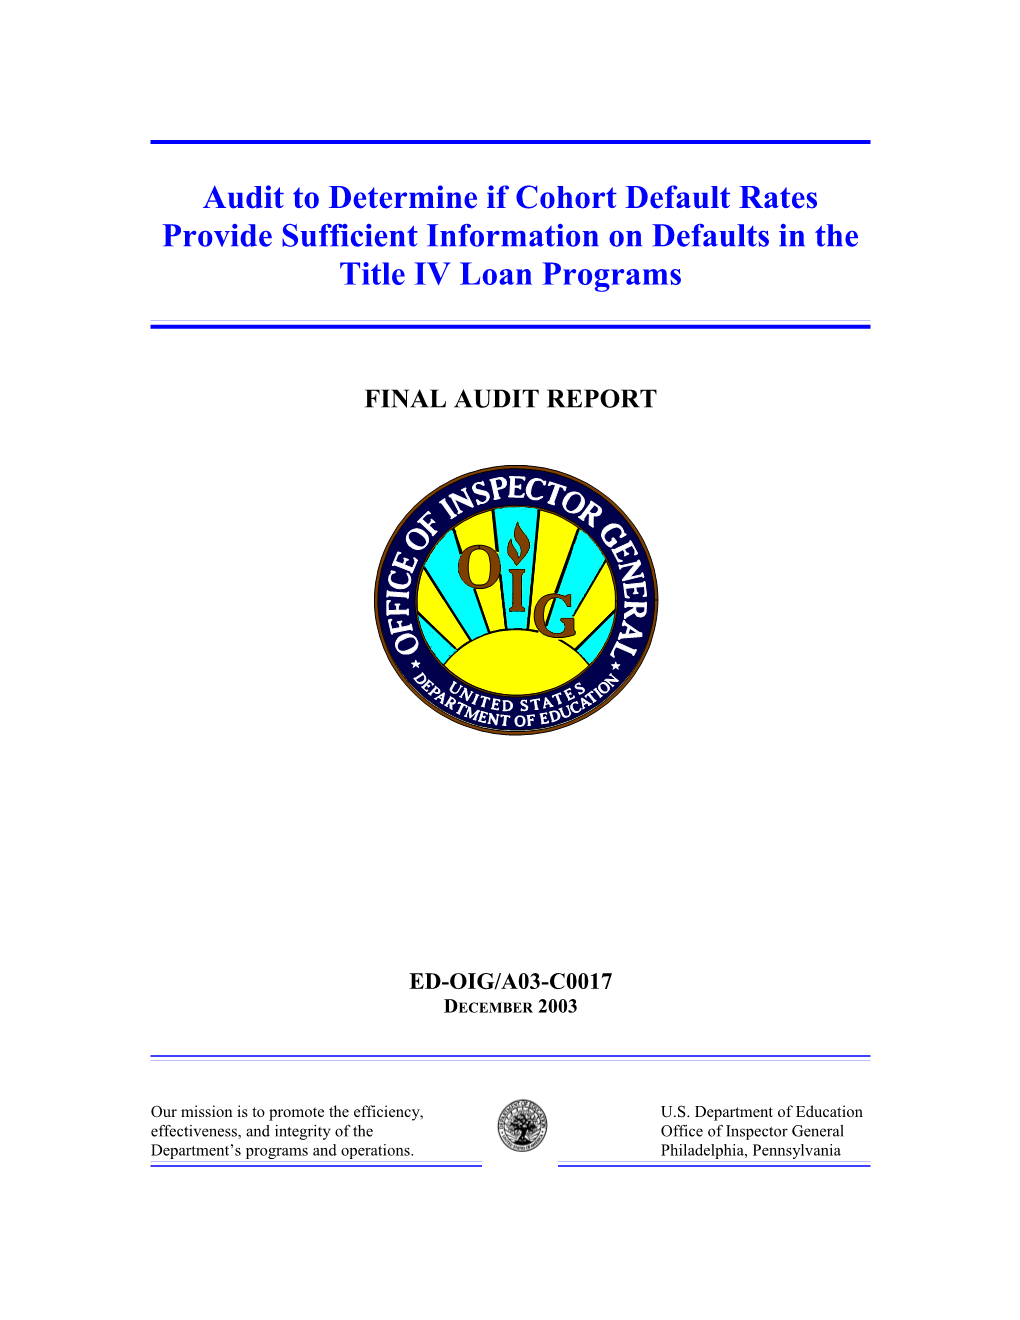 Audit to Determine If Cohort Default Rates Provide Sufficient Information on Defaults In